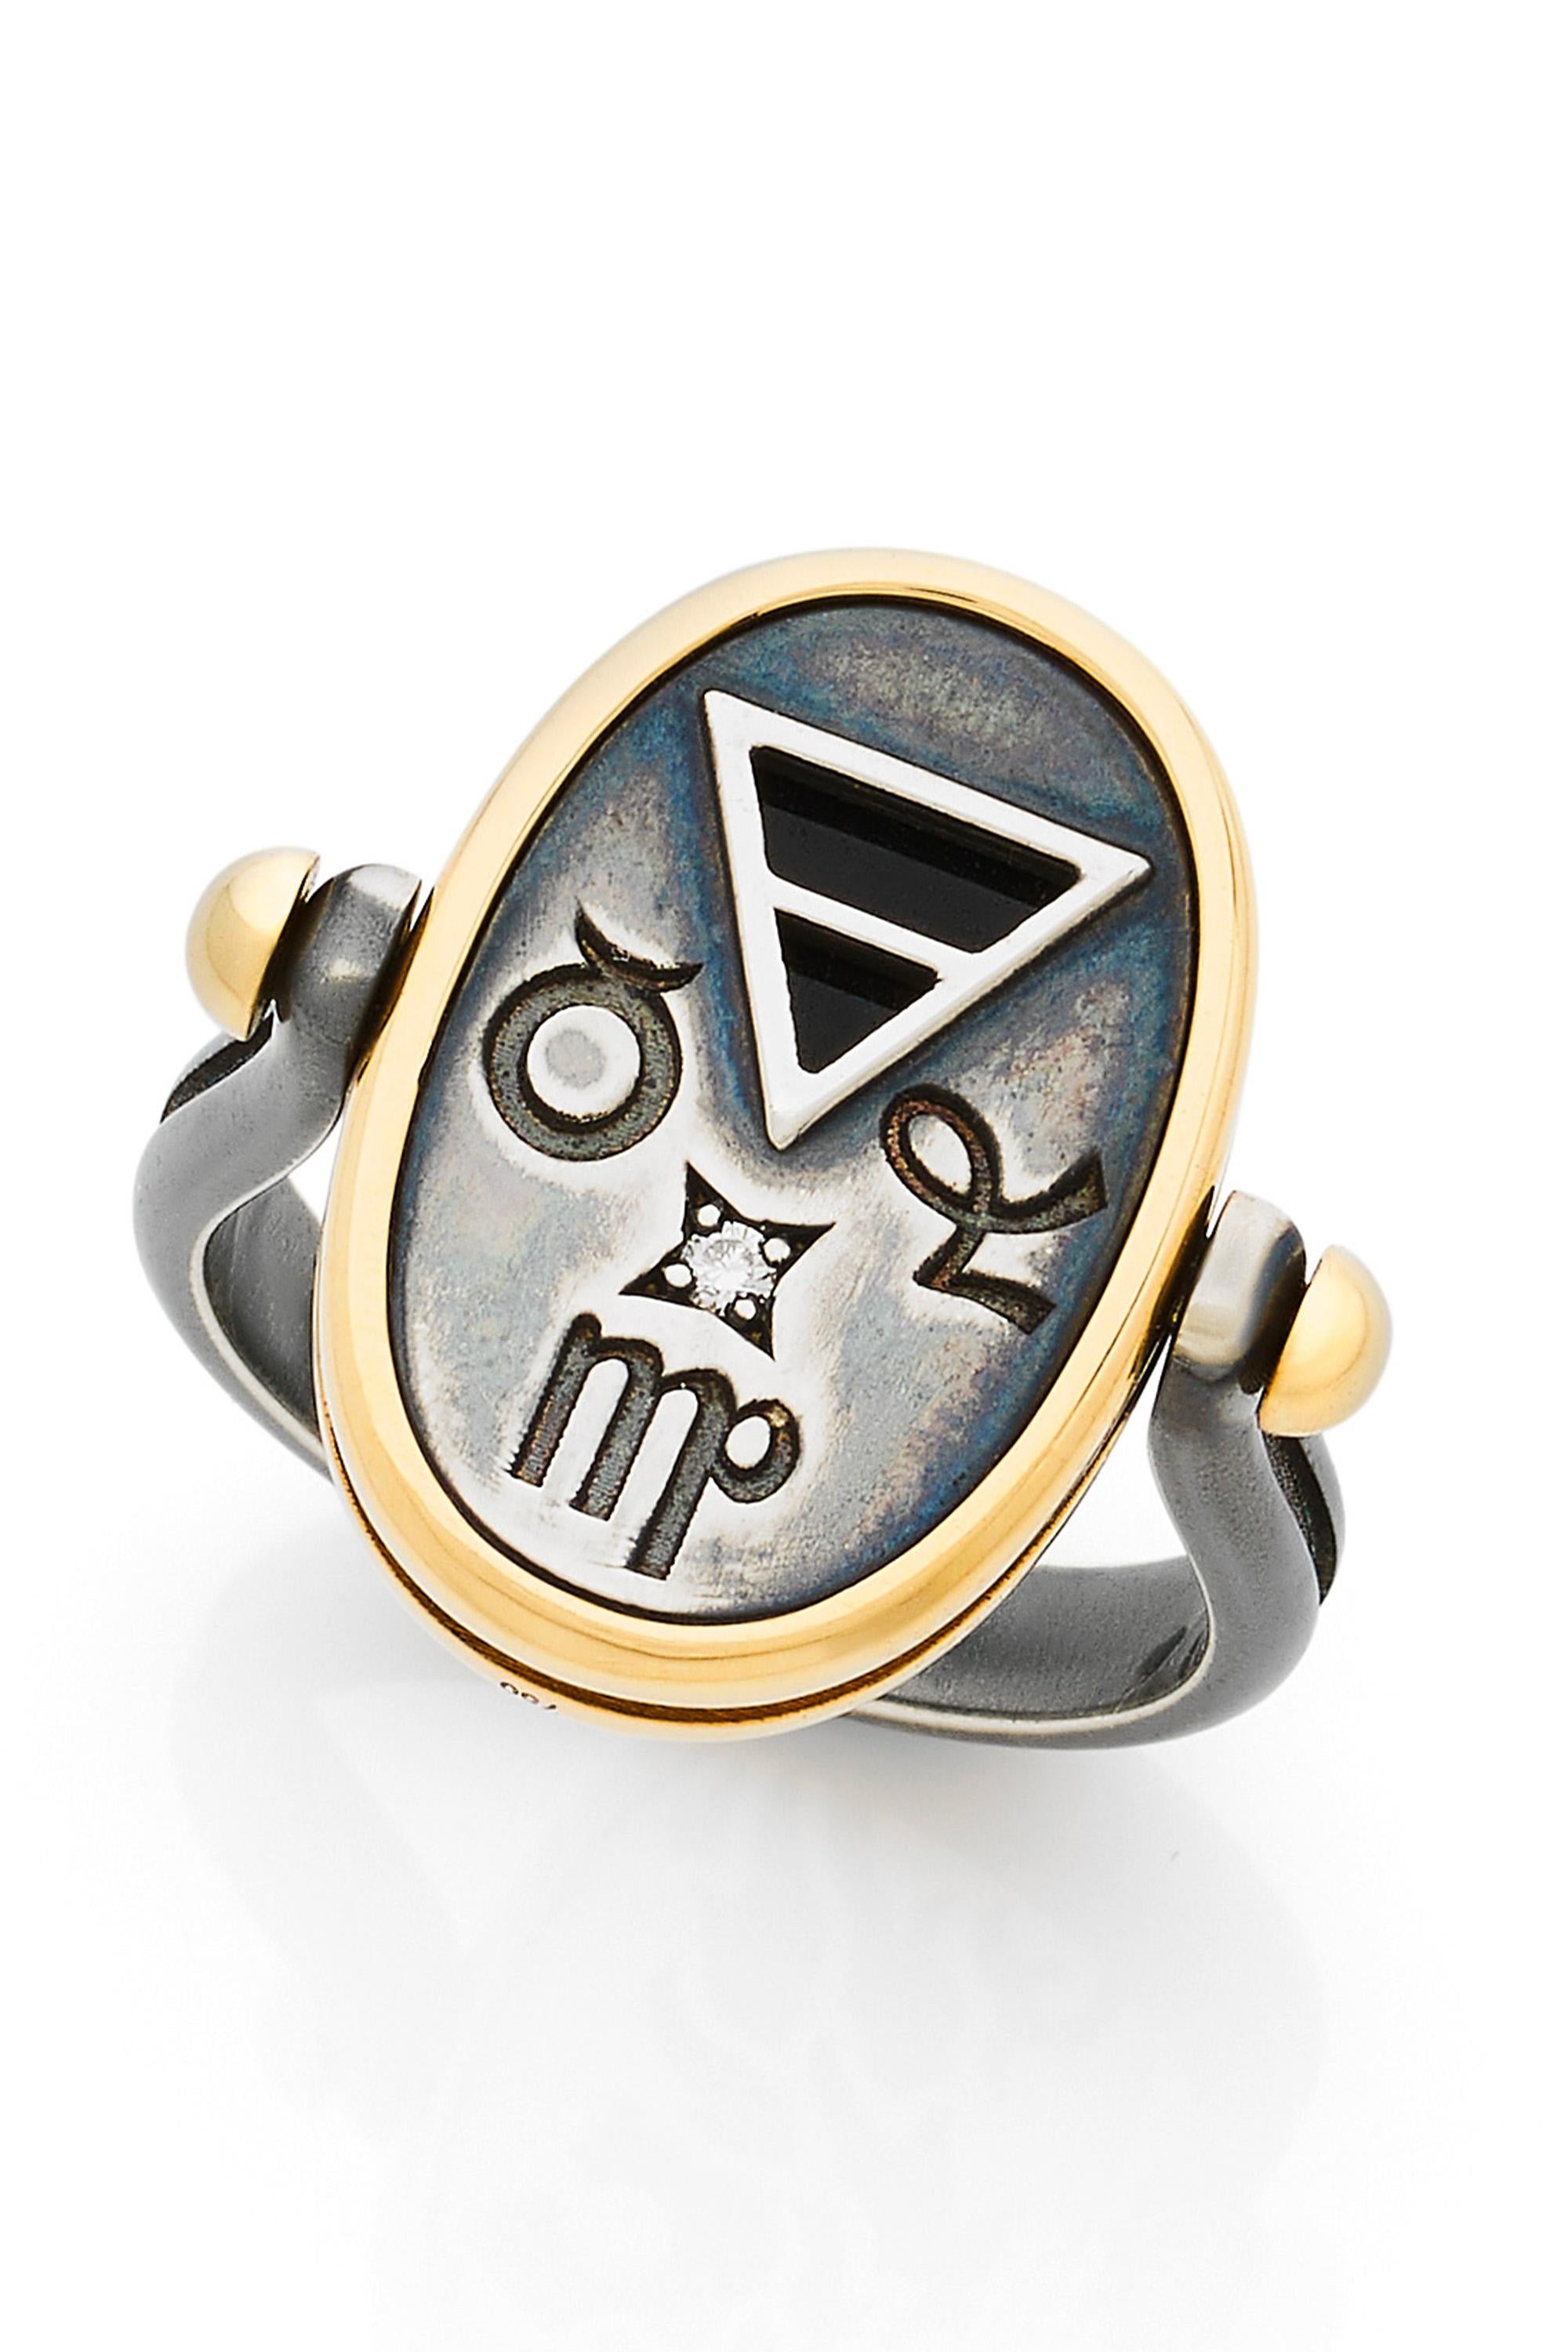 Gold and distressed silver ring. On one side, encrusted with a diamond, are engraved Earth signs (Virgo, Capricorn, Taurus). On the other side is an openwork depicting a lion on an onyx base. 

Details:
Diamond: 0.015 cts
18k Yellow Gold: 4